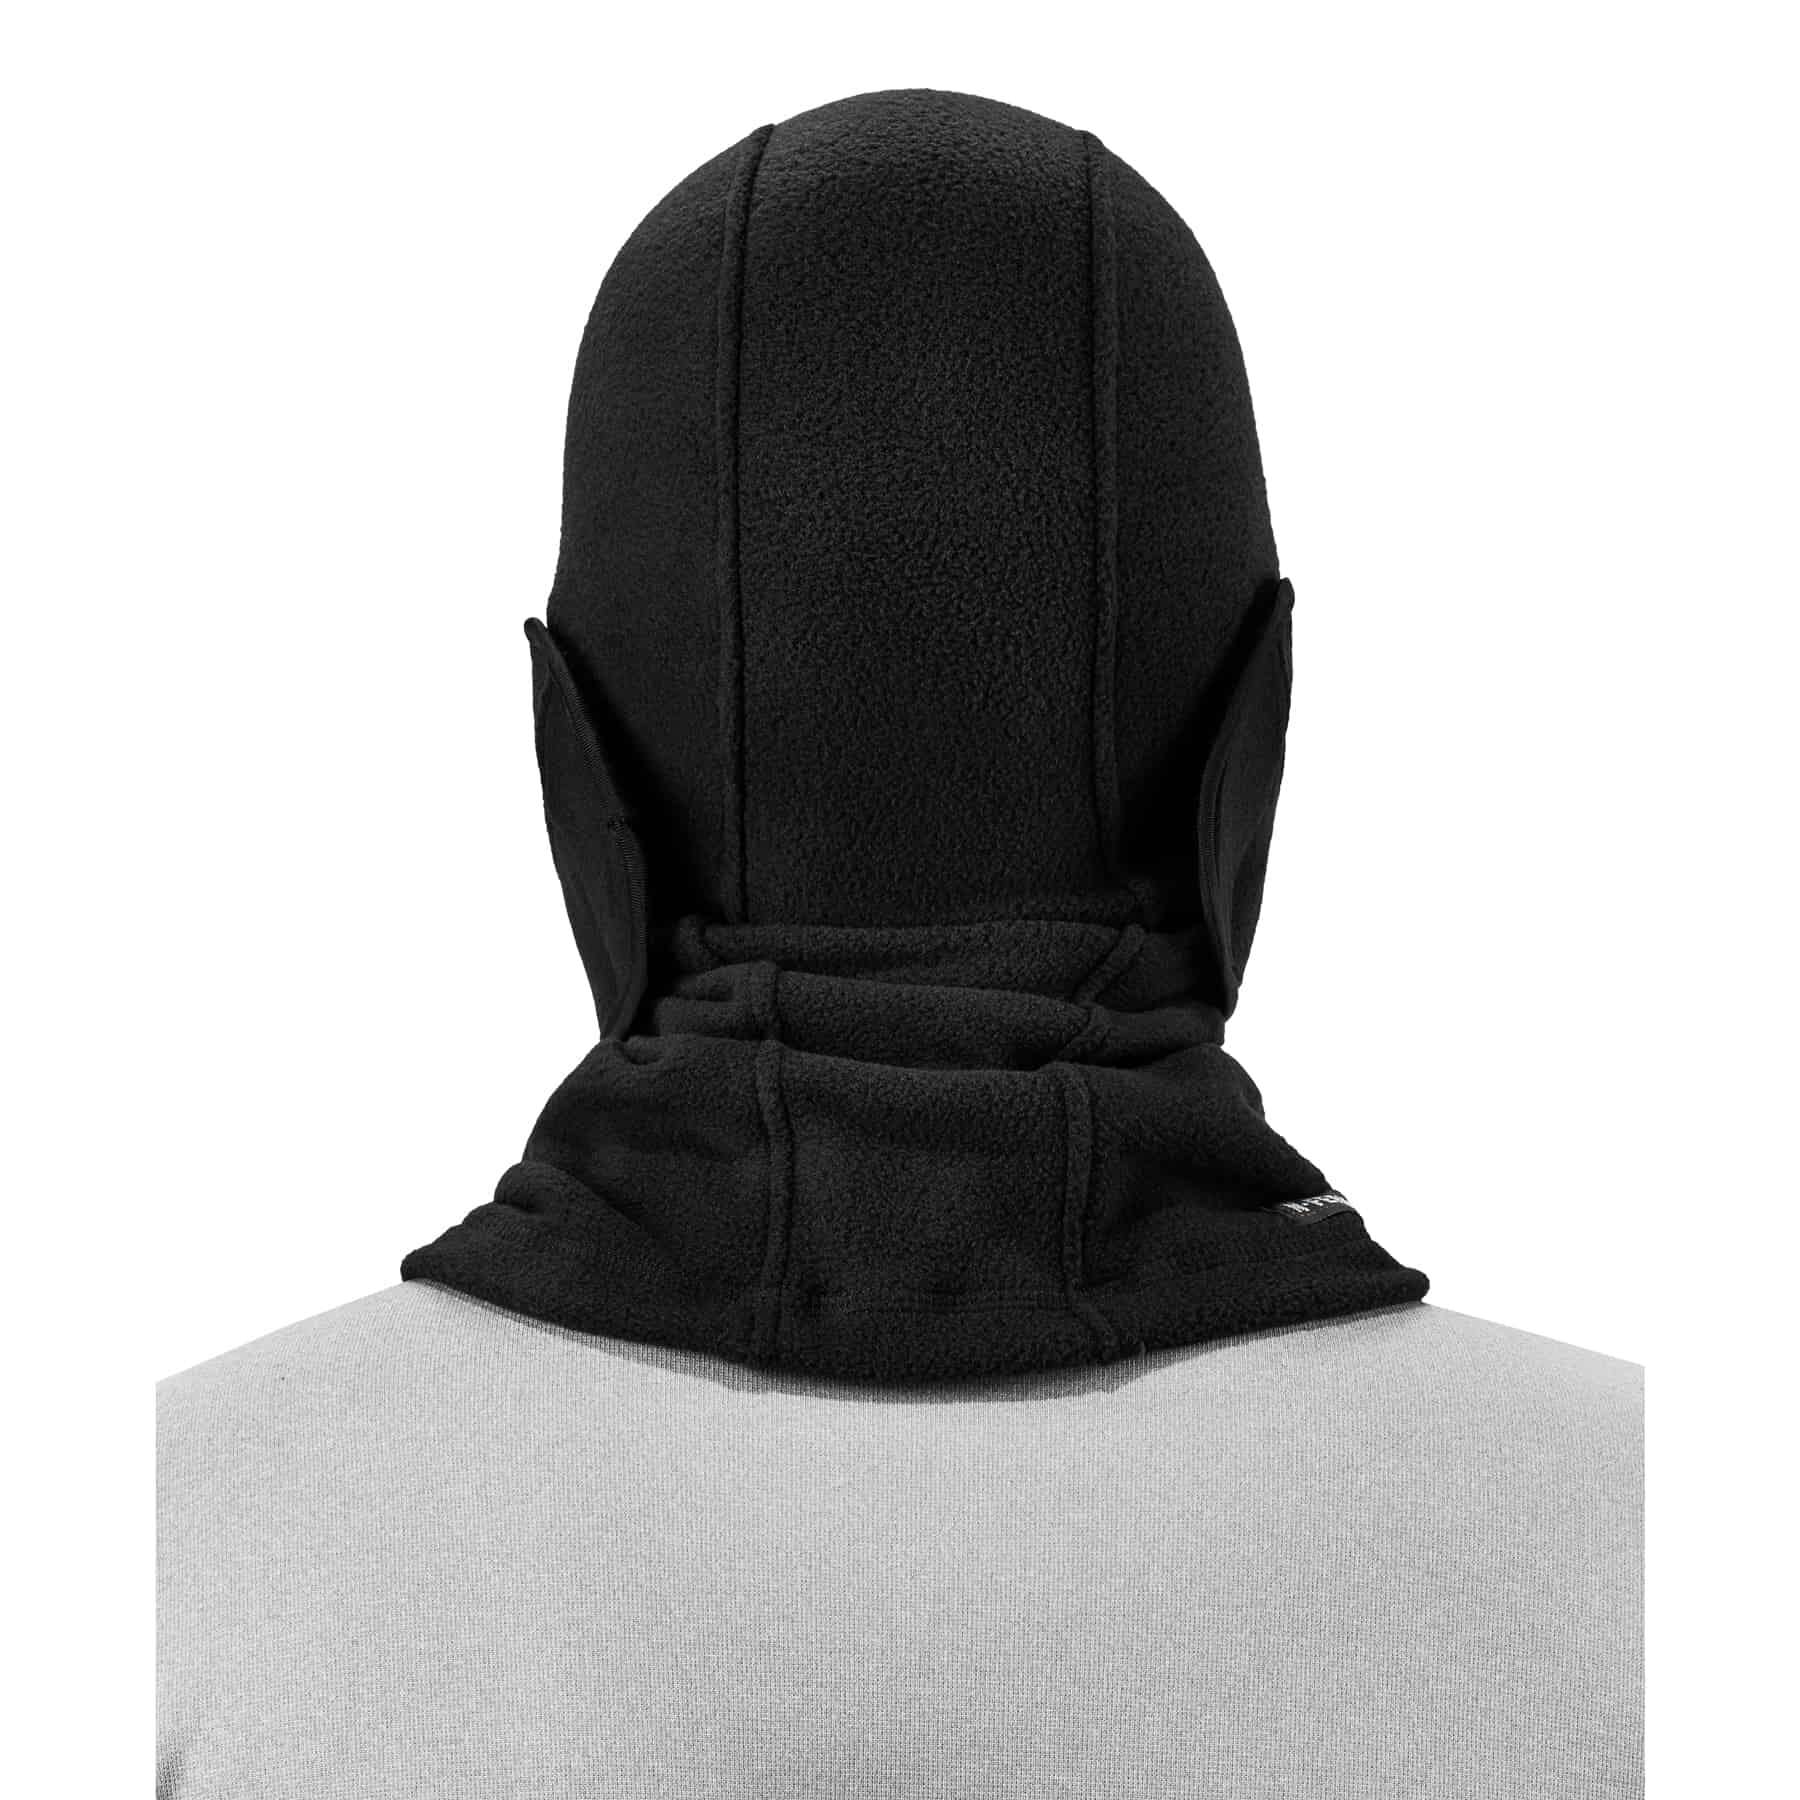 Details about   Deluxe Snood with Face Guard Carp Fishing Hunting Cycling Warmer Balaclava Hat 